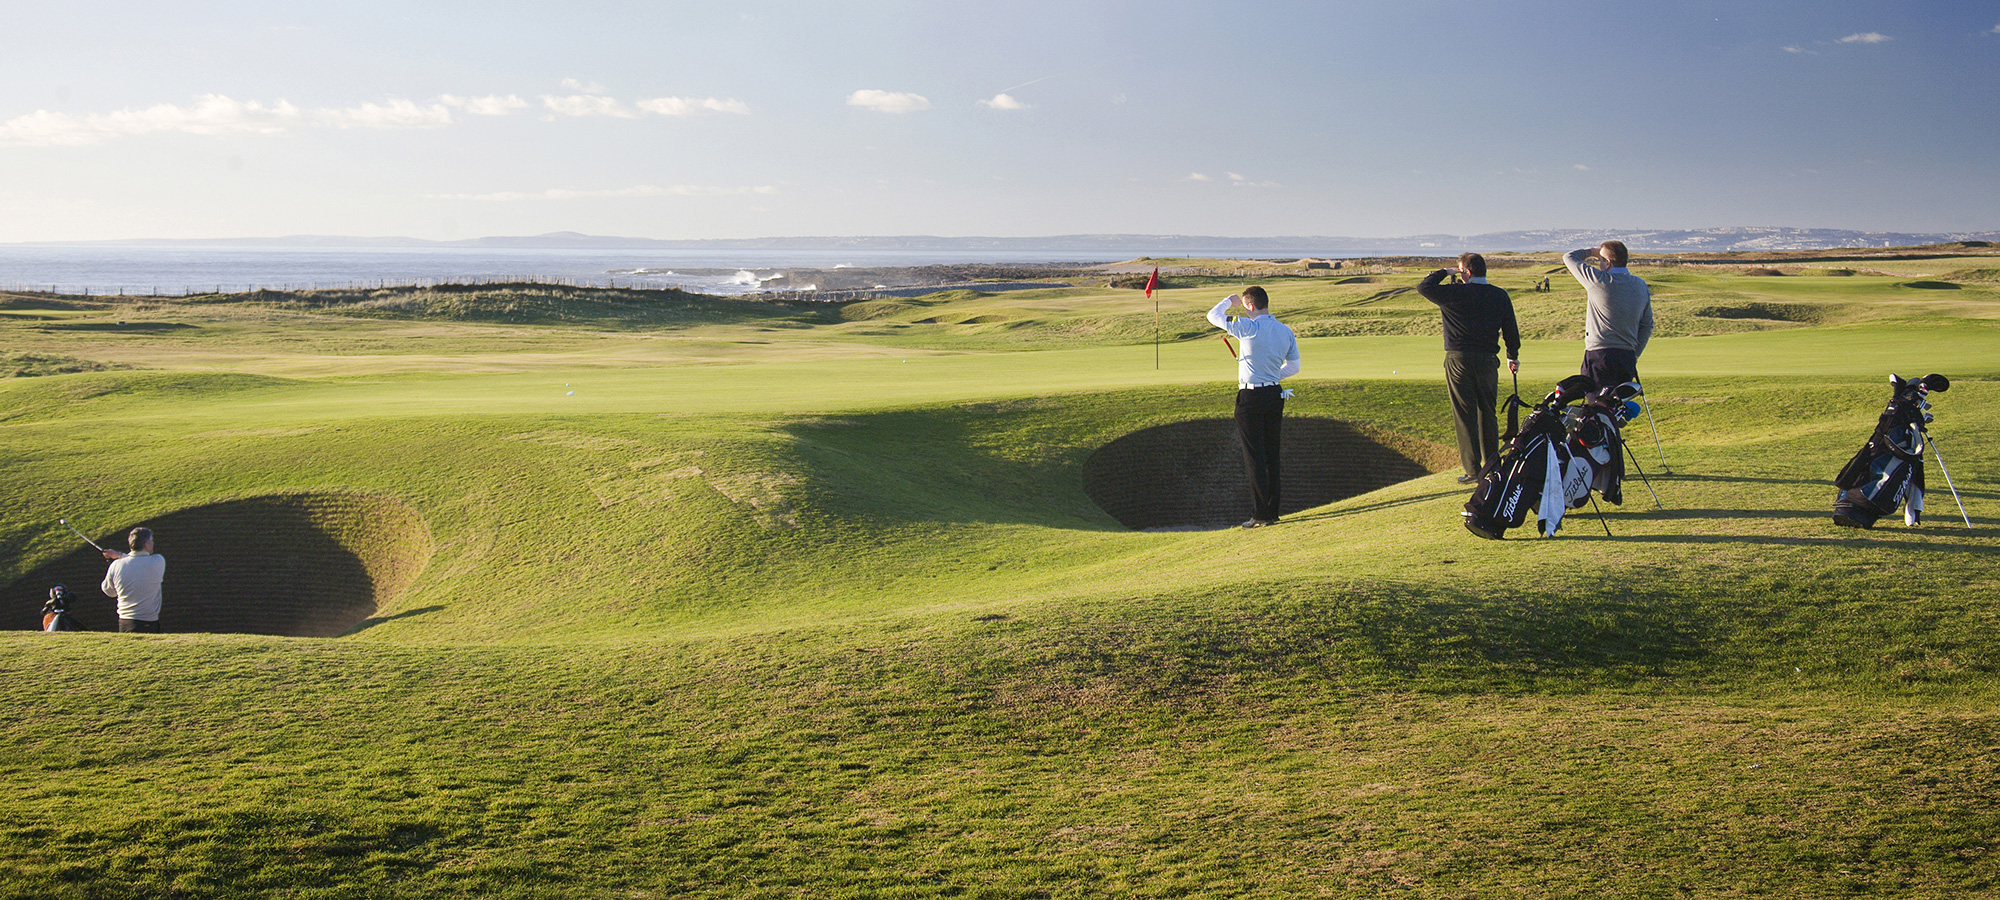 Top 5 Golf Courses in Wales